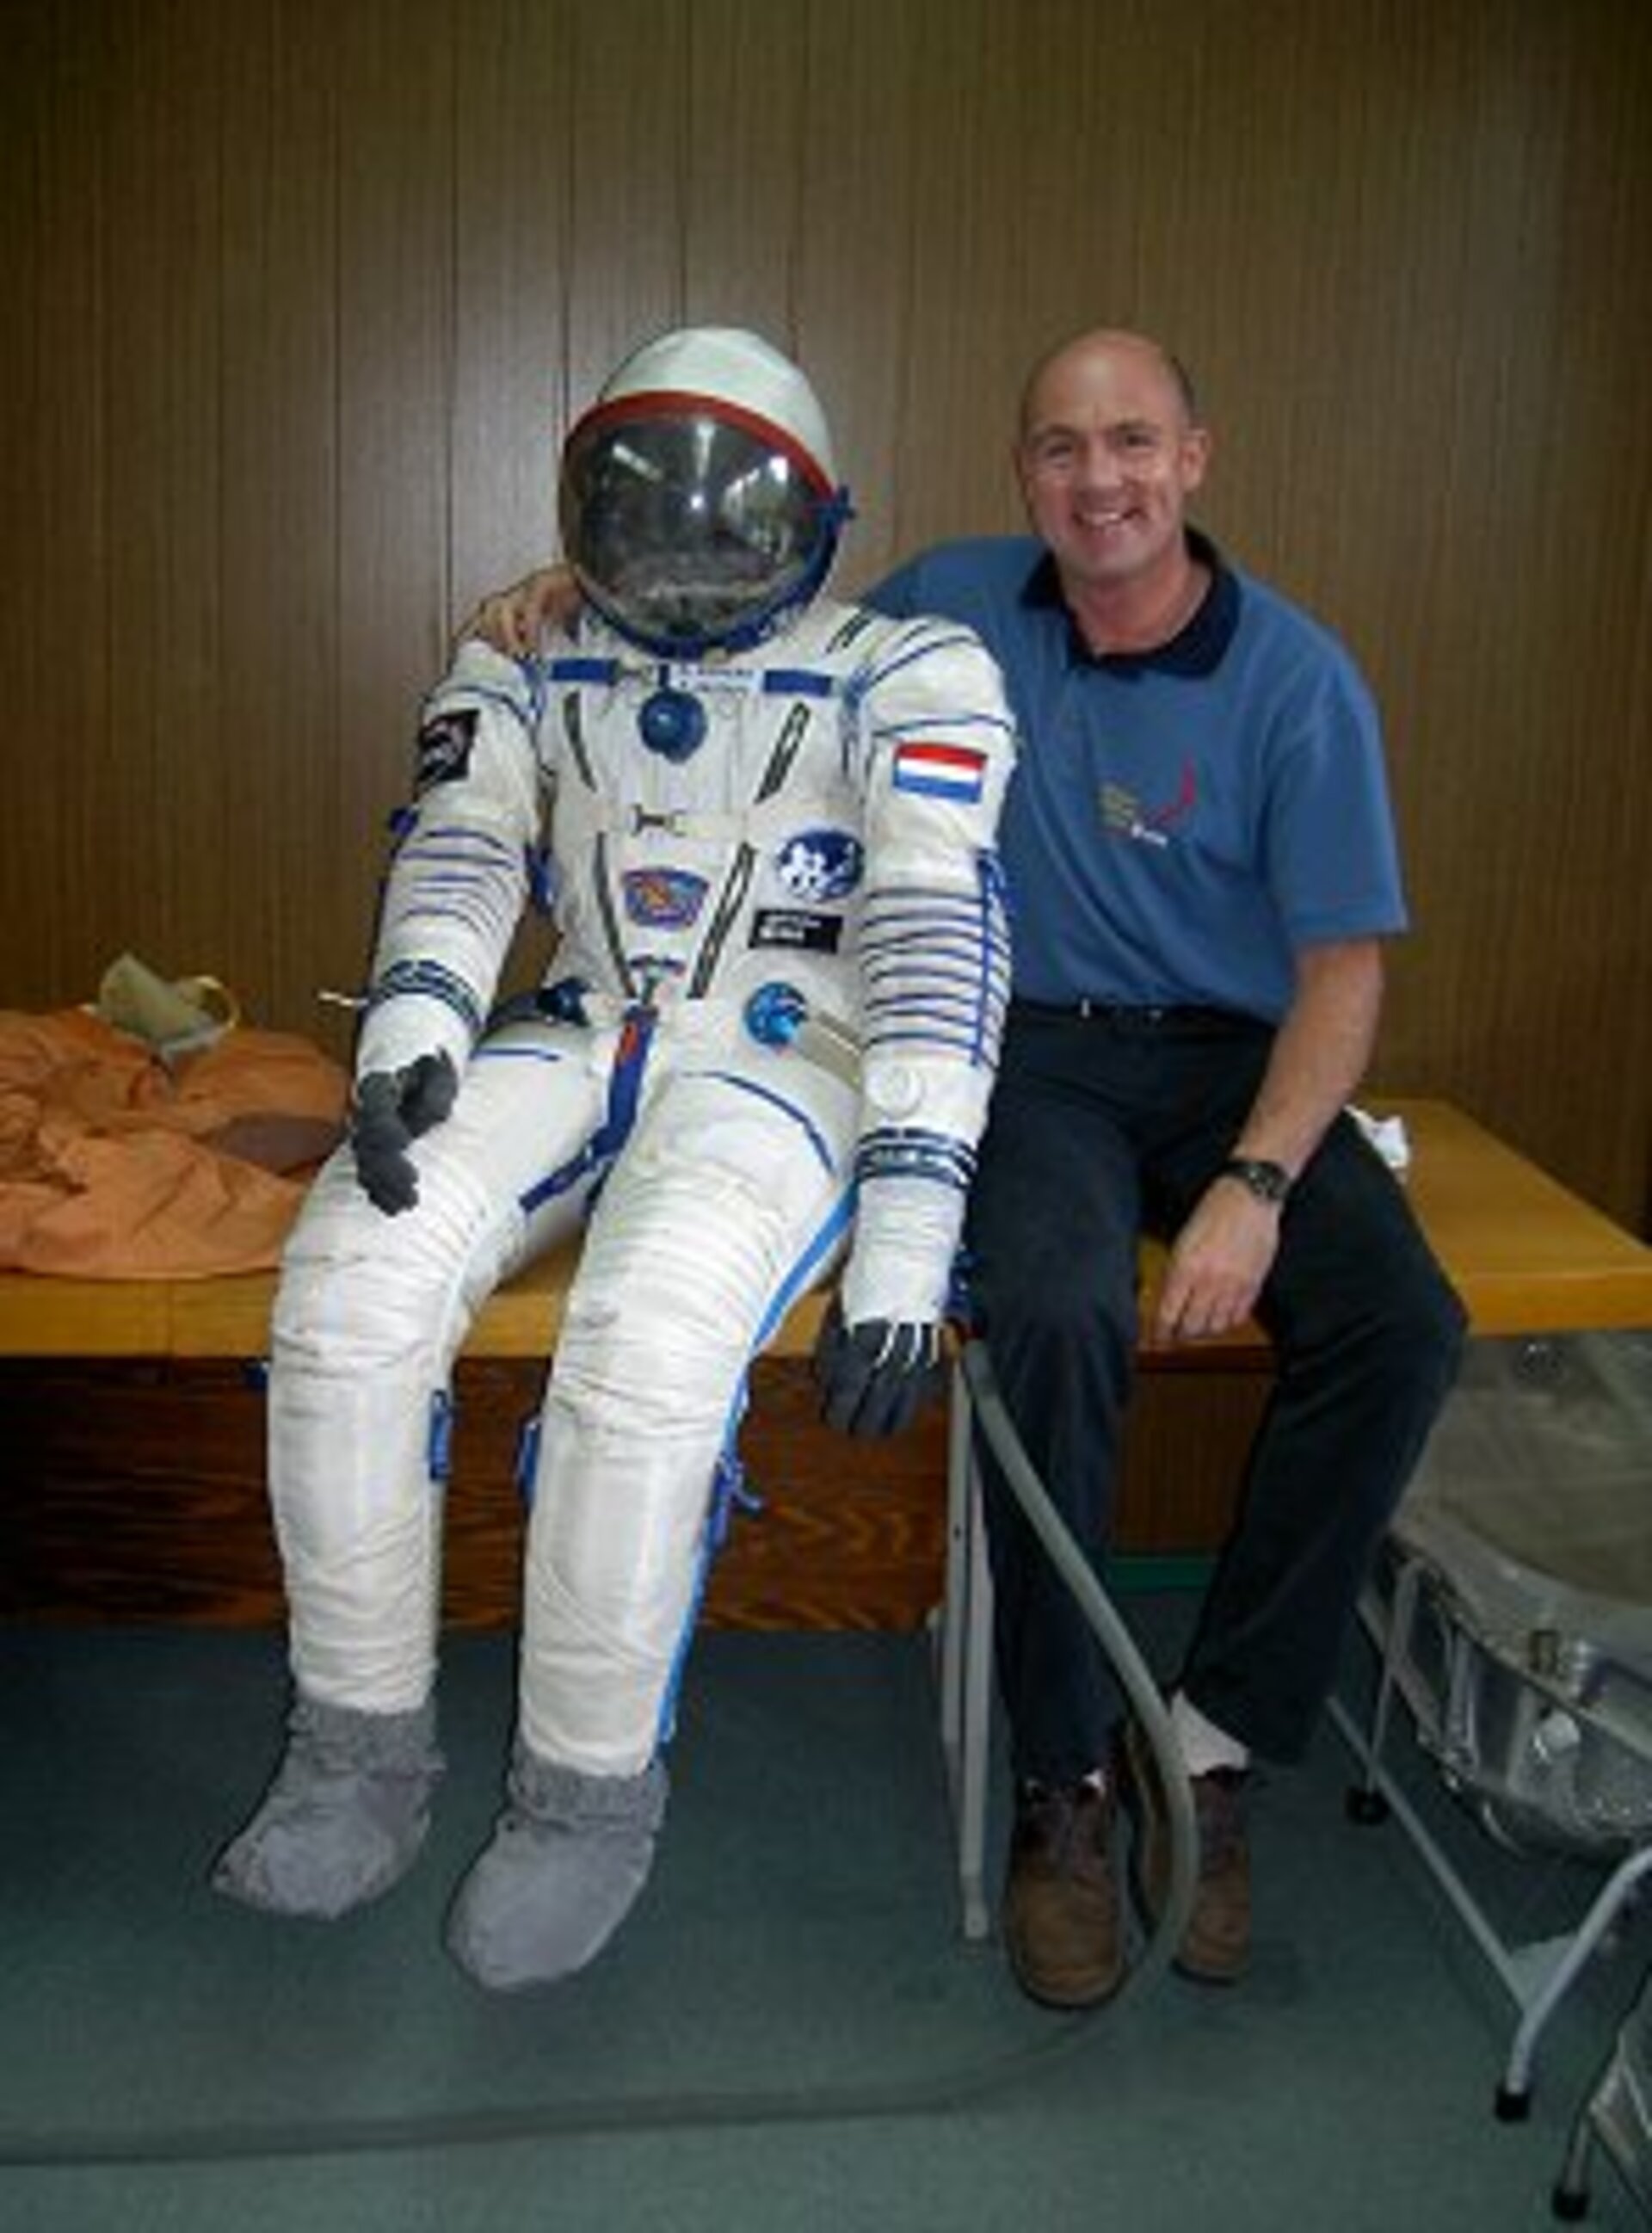 André Kuipers with his spacesuit